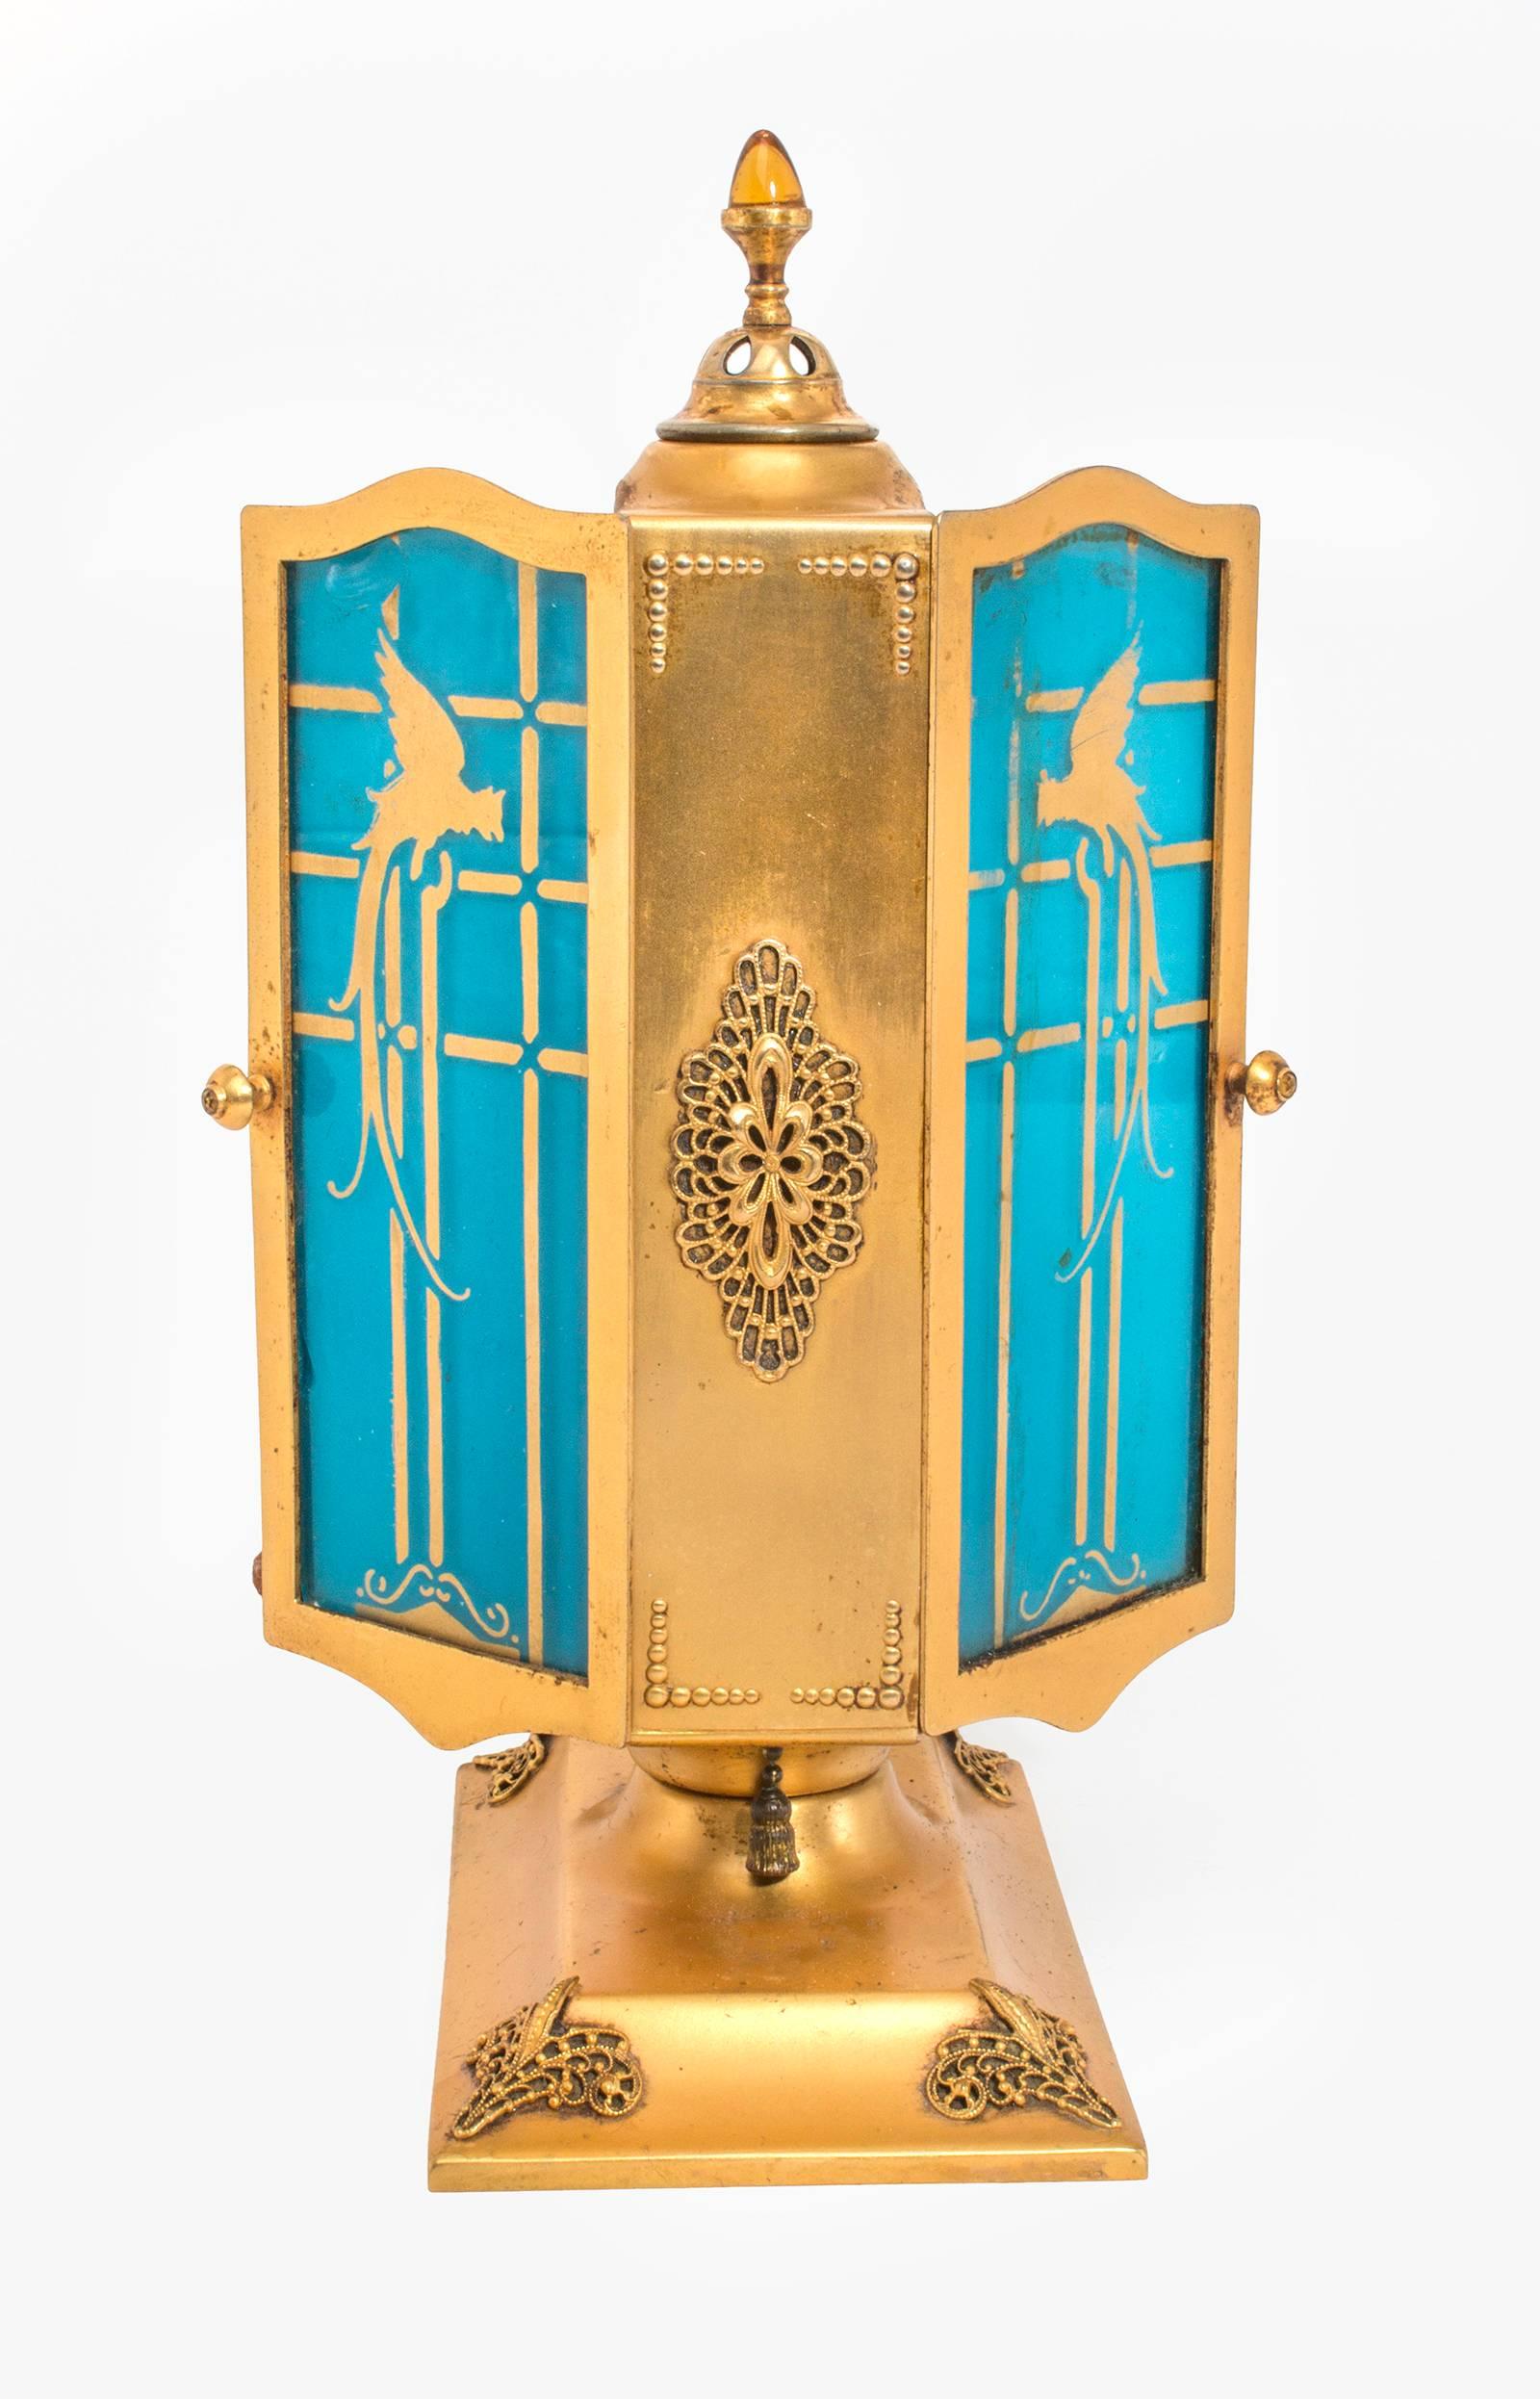 DeVilbiss Perfume Lamp, circa 1926 In Excellent Condition For Sale In Summerland, CA